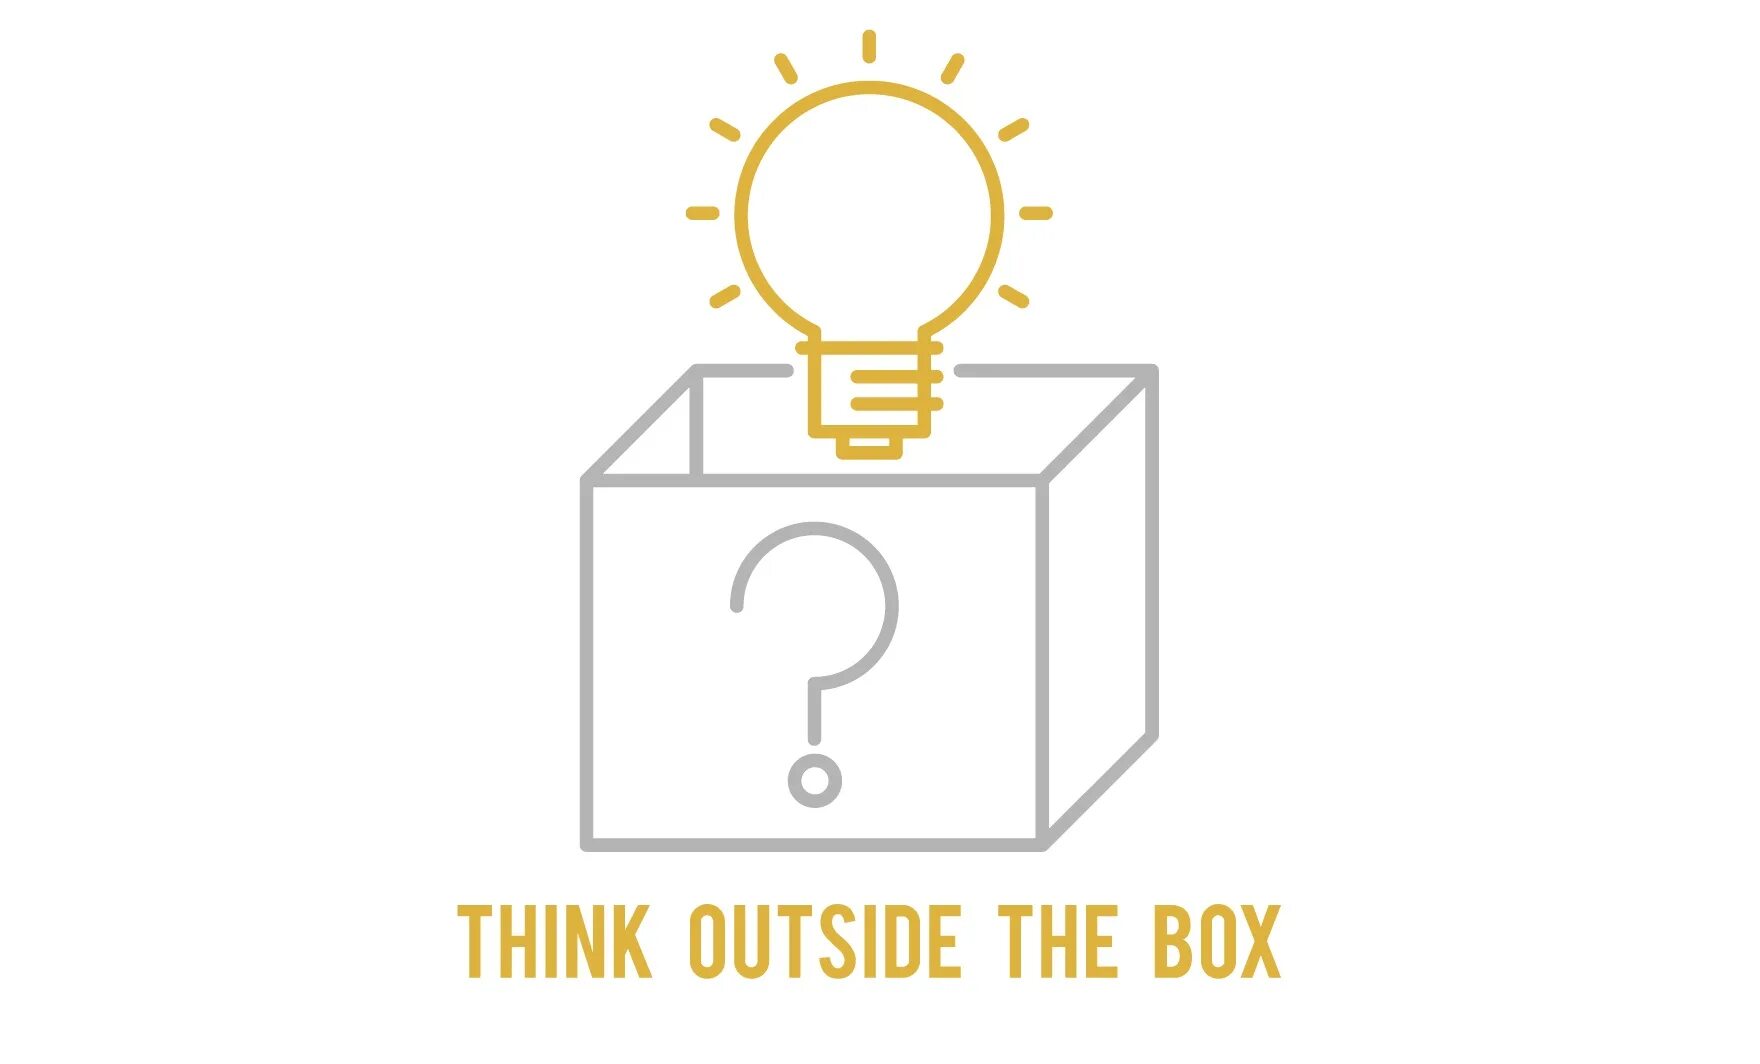 He takes the box. Think outside the Box. Thinking outside the Box. Think out of the Box. Thinking out of the Box.